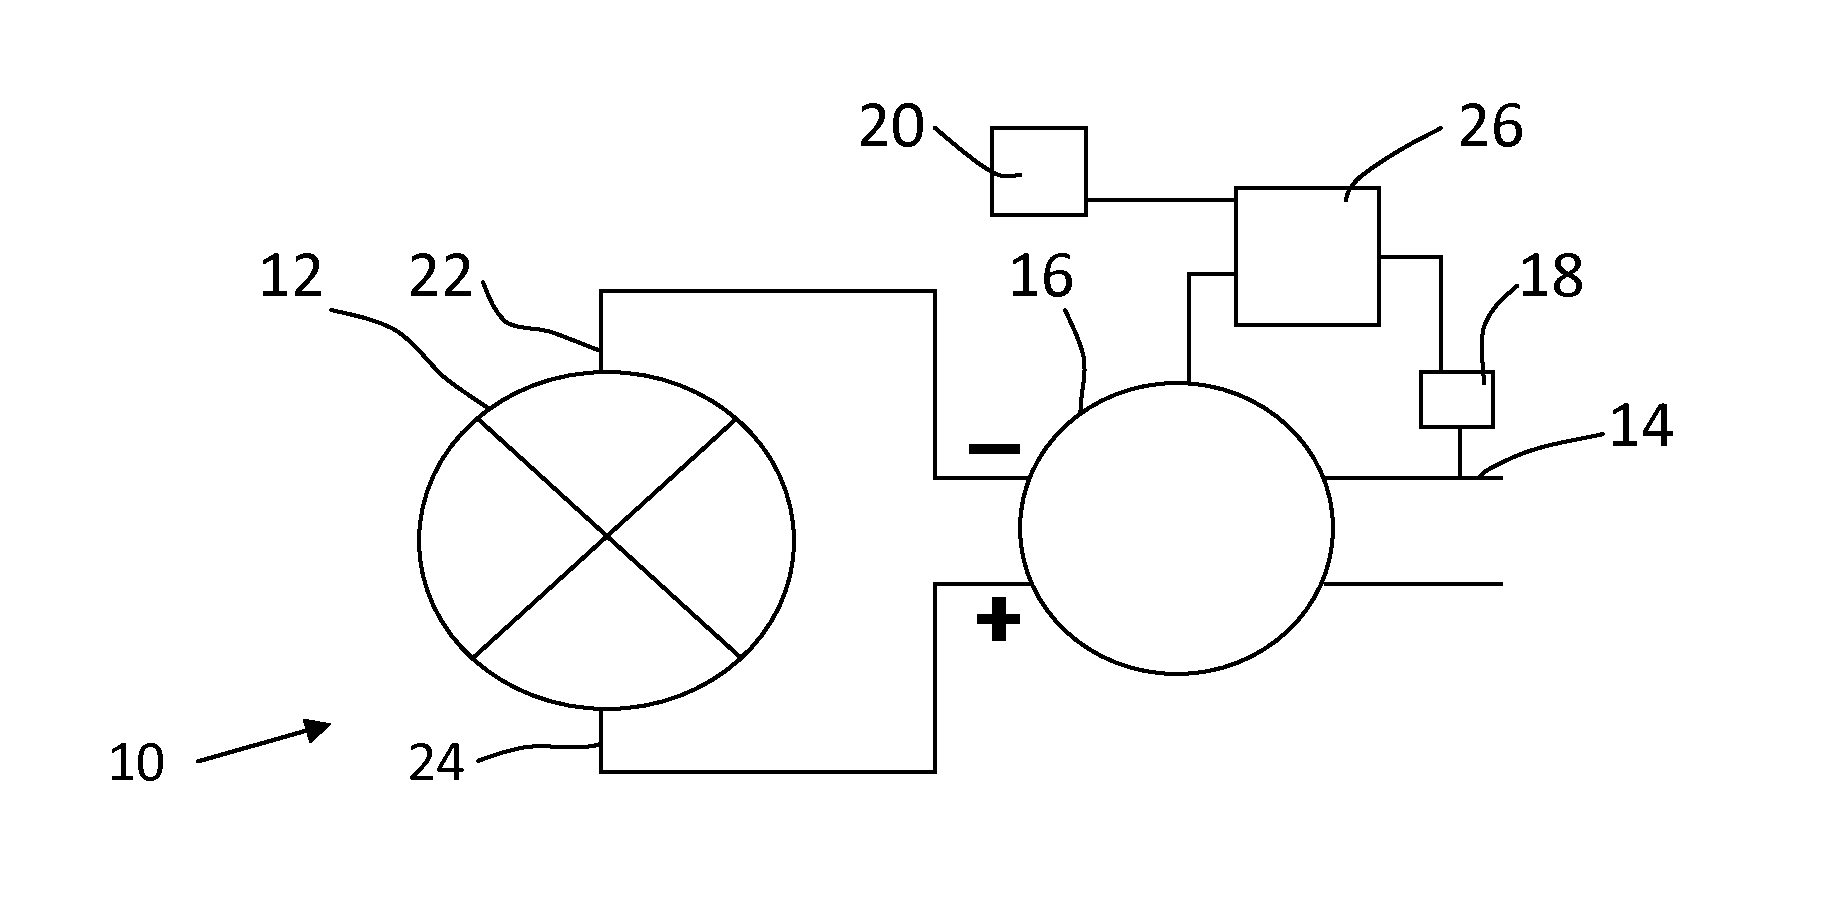 Treatment device and method of use